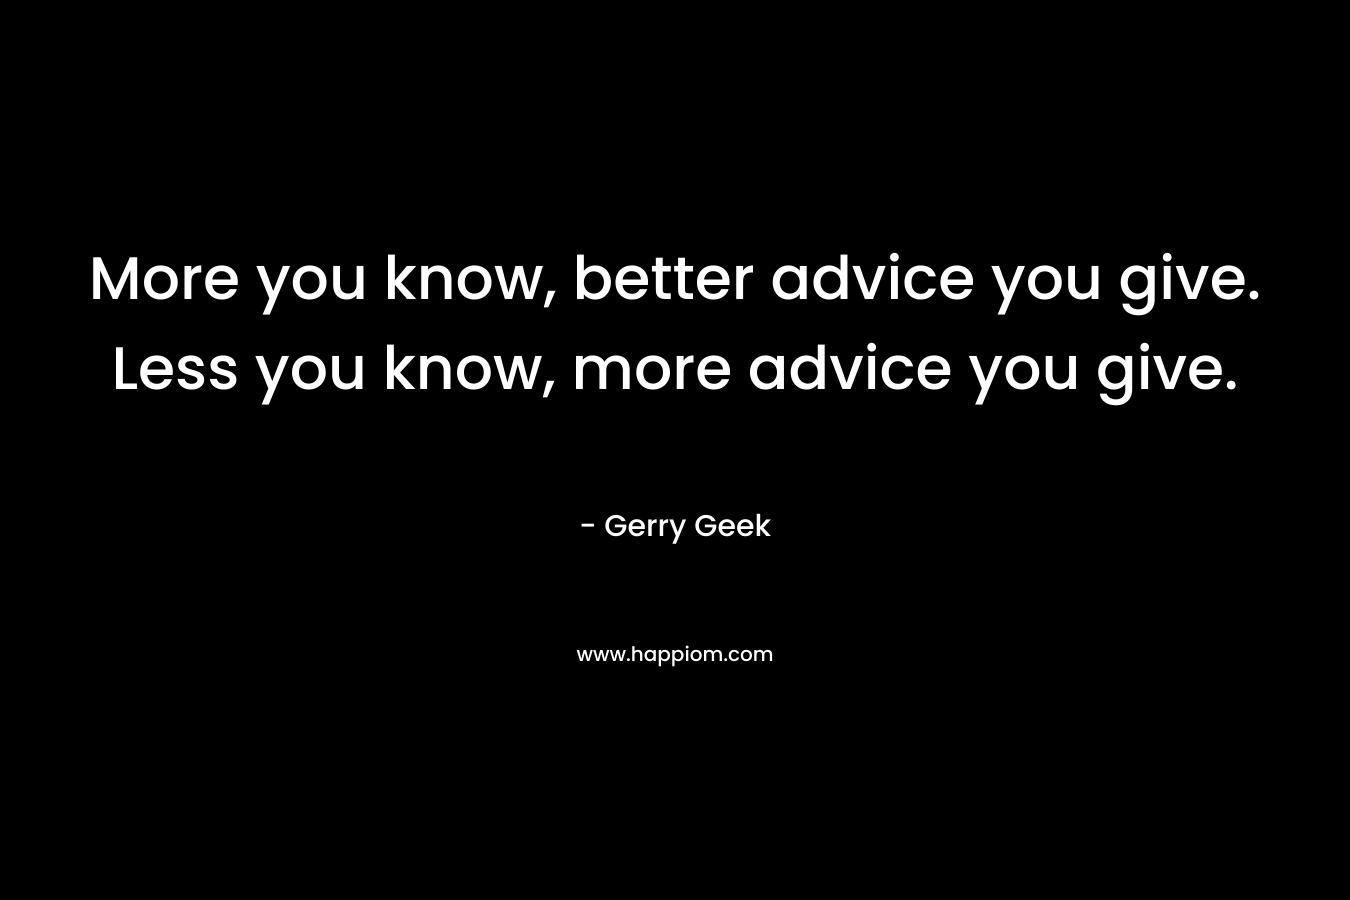 More you know, better advice you give. Less you know, more advice you give. – Gerry Geek